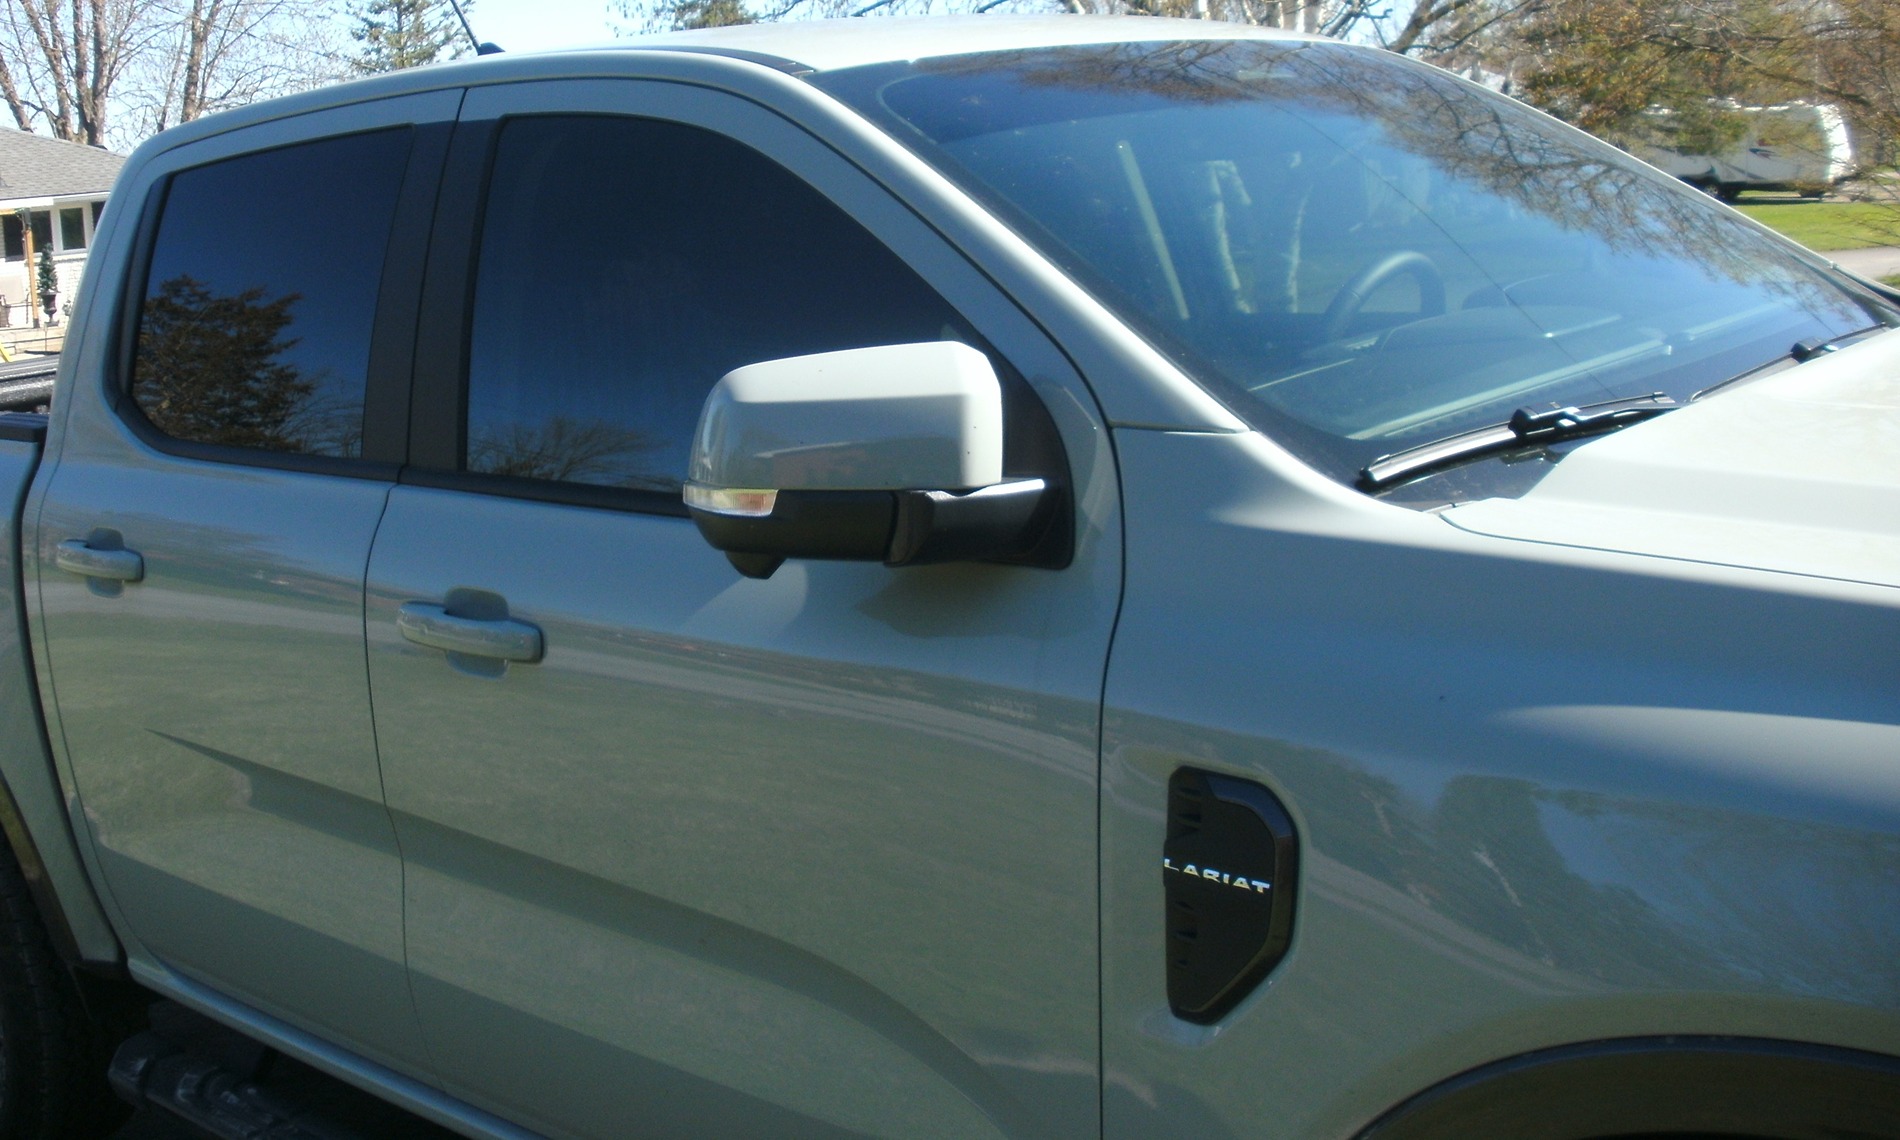 Ford Ranger Window Tinting -- 20% to match the rear window factory tint? Pass front side view tint